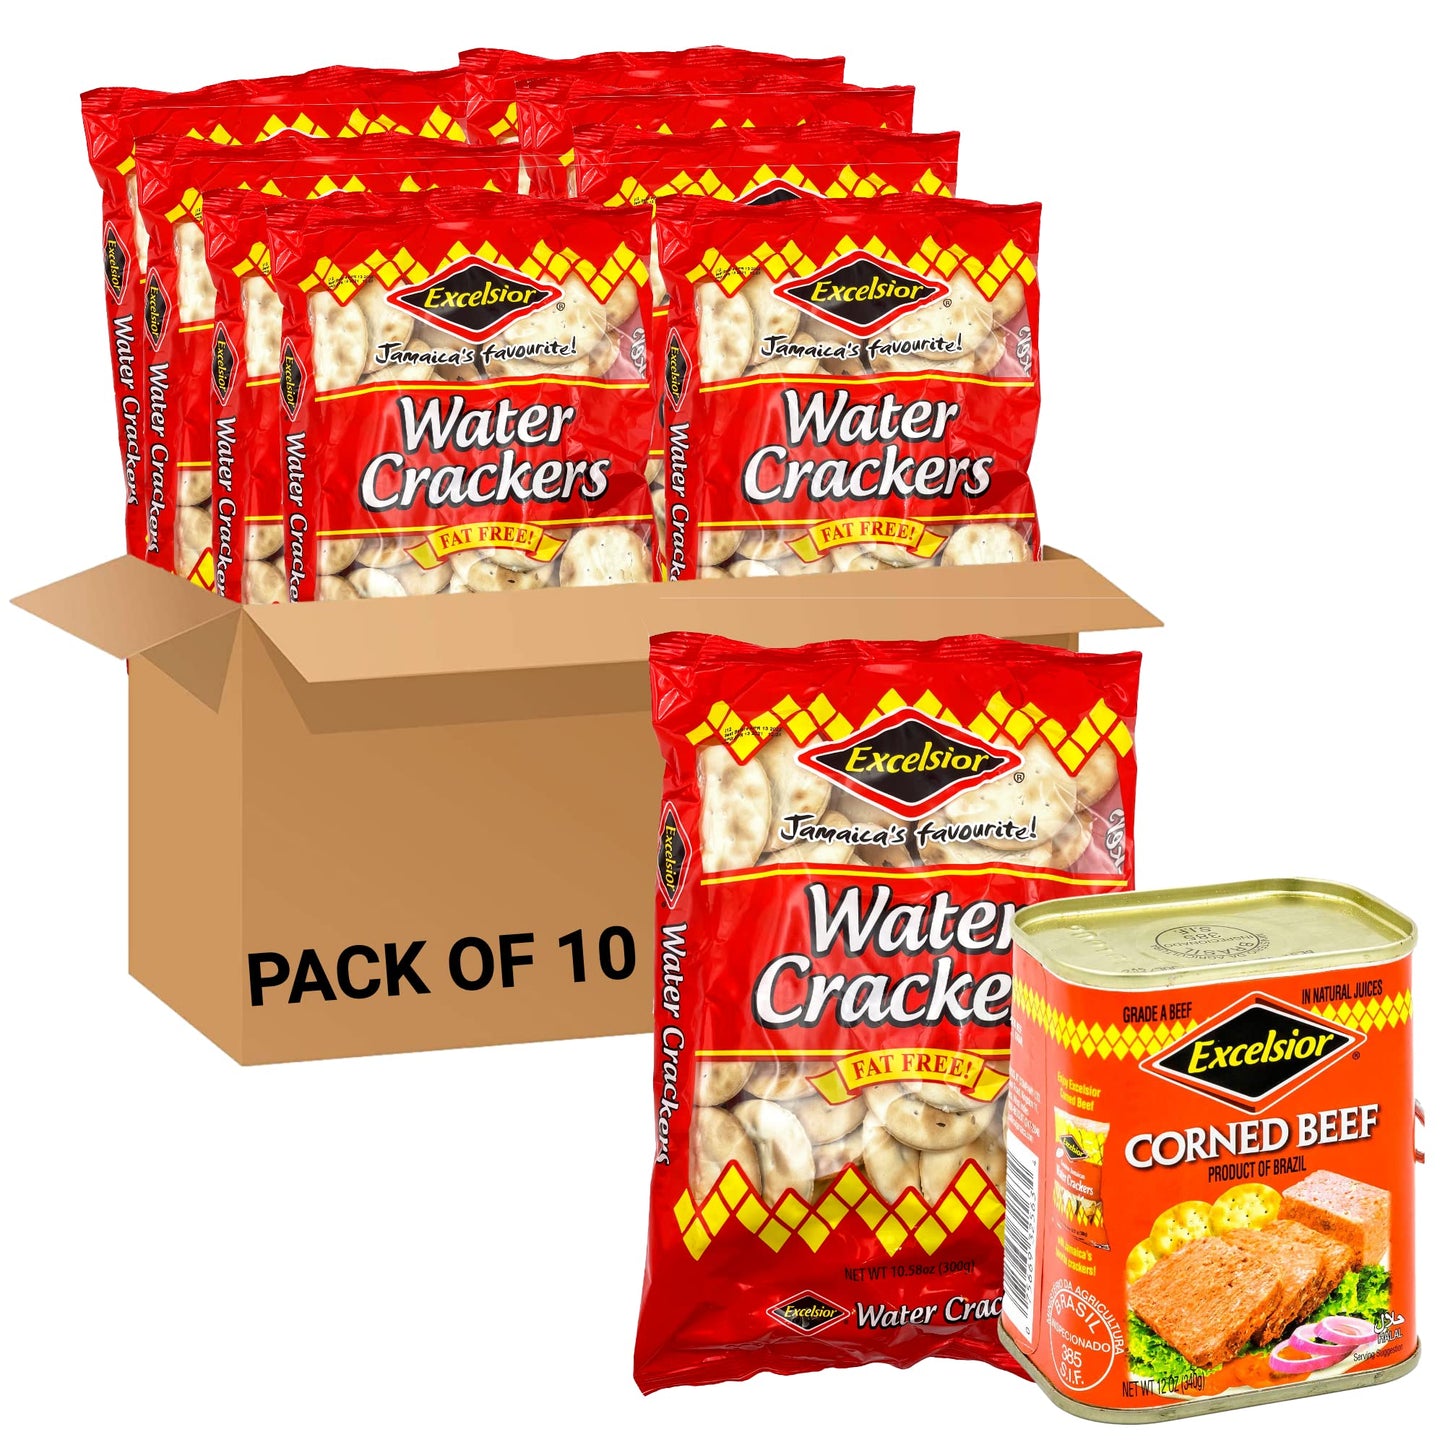 Excelsior Water Crackers, 10.58 oz (Pack of 10) + EXCELSIOR Corned Beef in Natural Juices, 12 Ounce